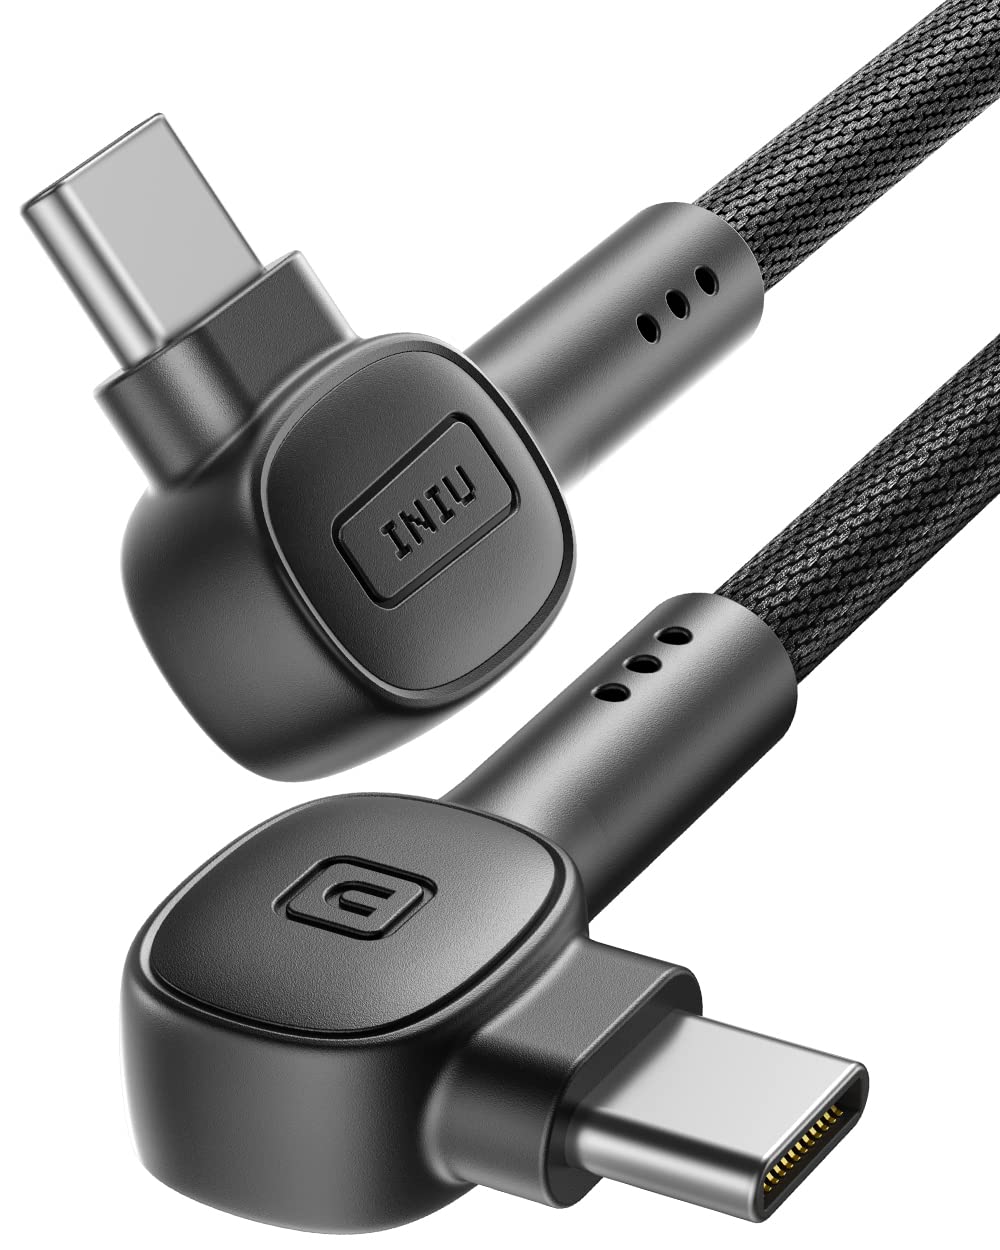  [AUSTRALIA] - USB C Cable, INIU [2 Pack 6.6ft 100W] 20V/5A PD QC 4.0 Fast Charging USB C to USB C Cable, Nylon Braided Phone Charger Type C Data Cord for iPad Pro MacBook Air Samsung S21 S20 Note Google Pixel etc.